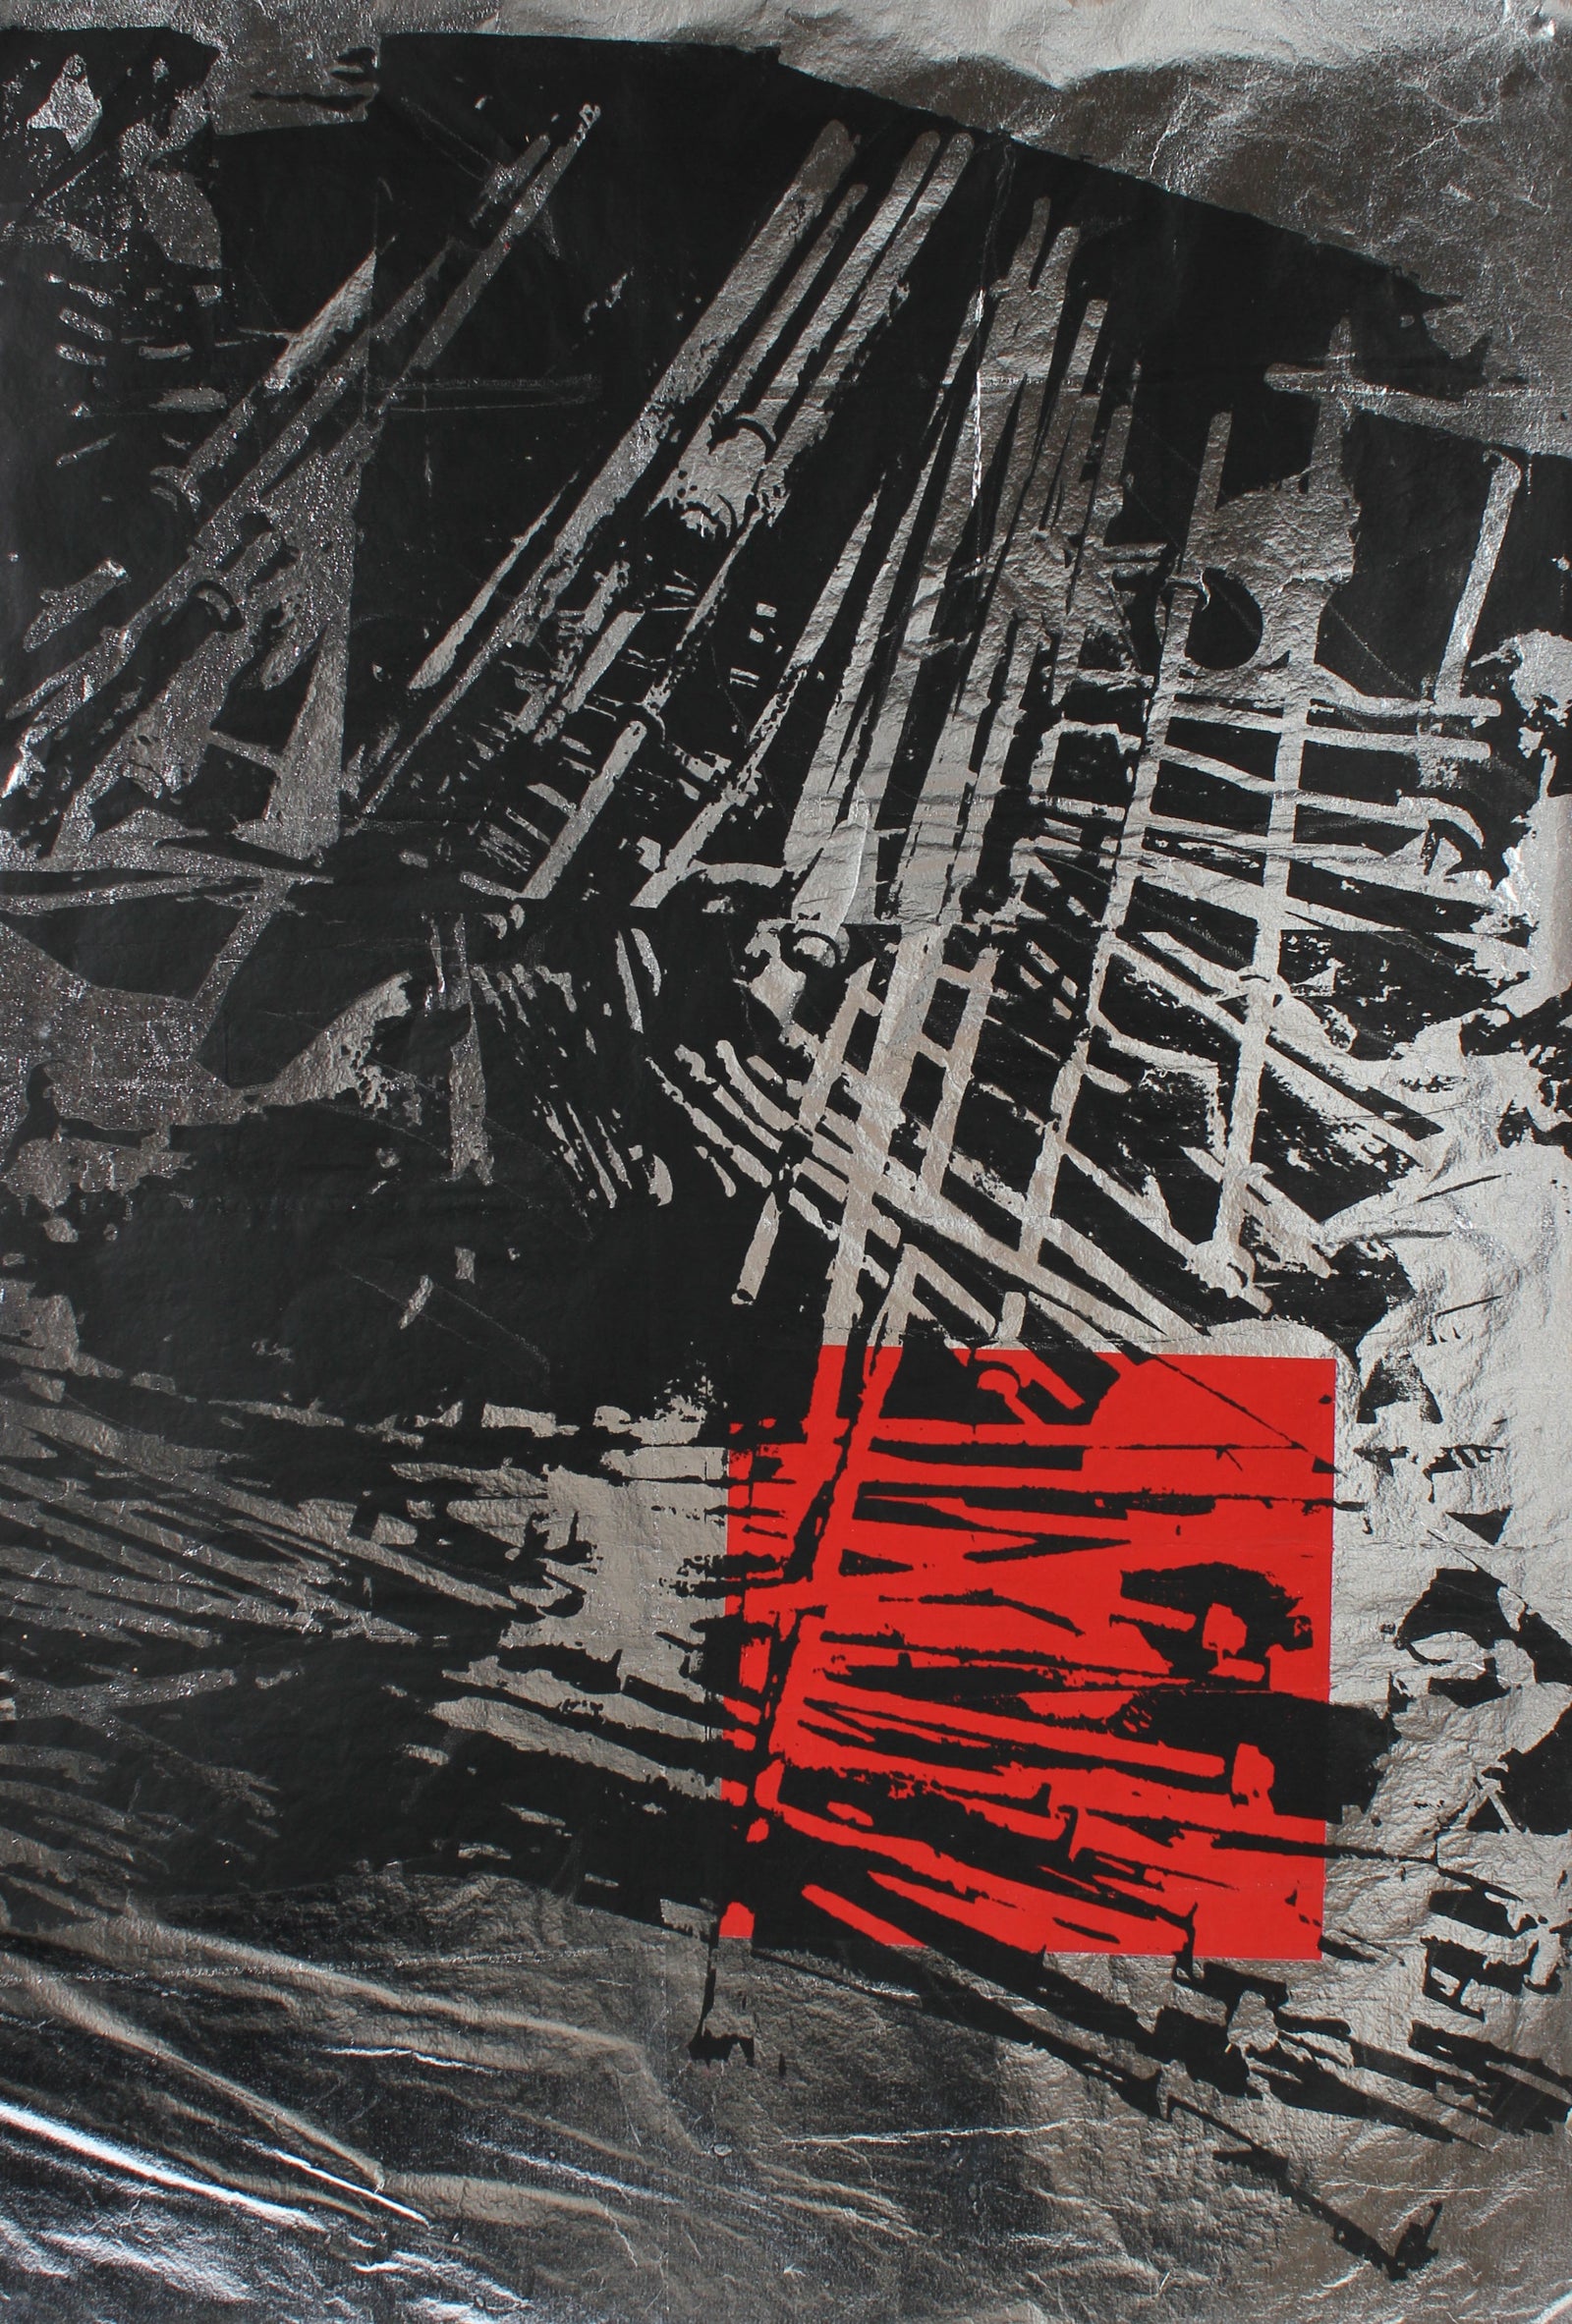 Monochromatic Abstract With Red Square Detail <br>1970s Serigraph <br><br>#A0920